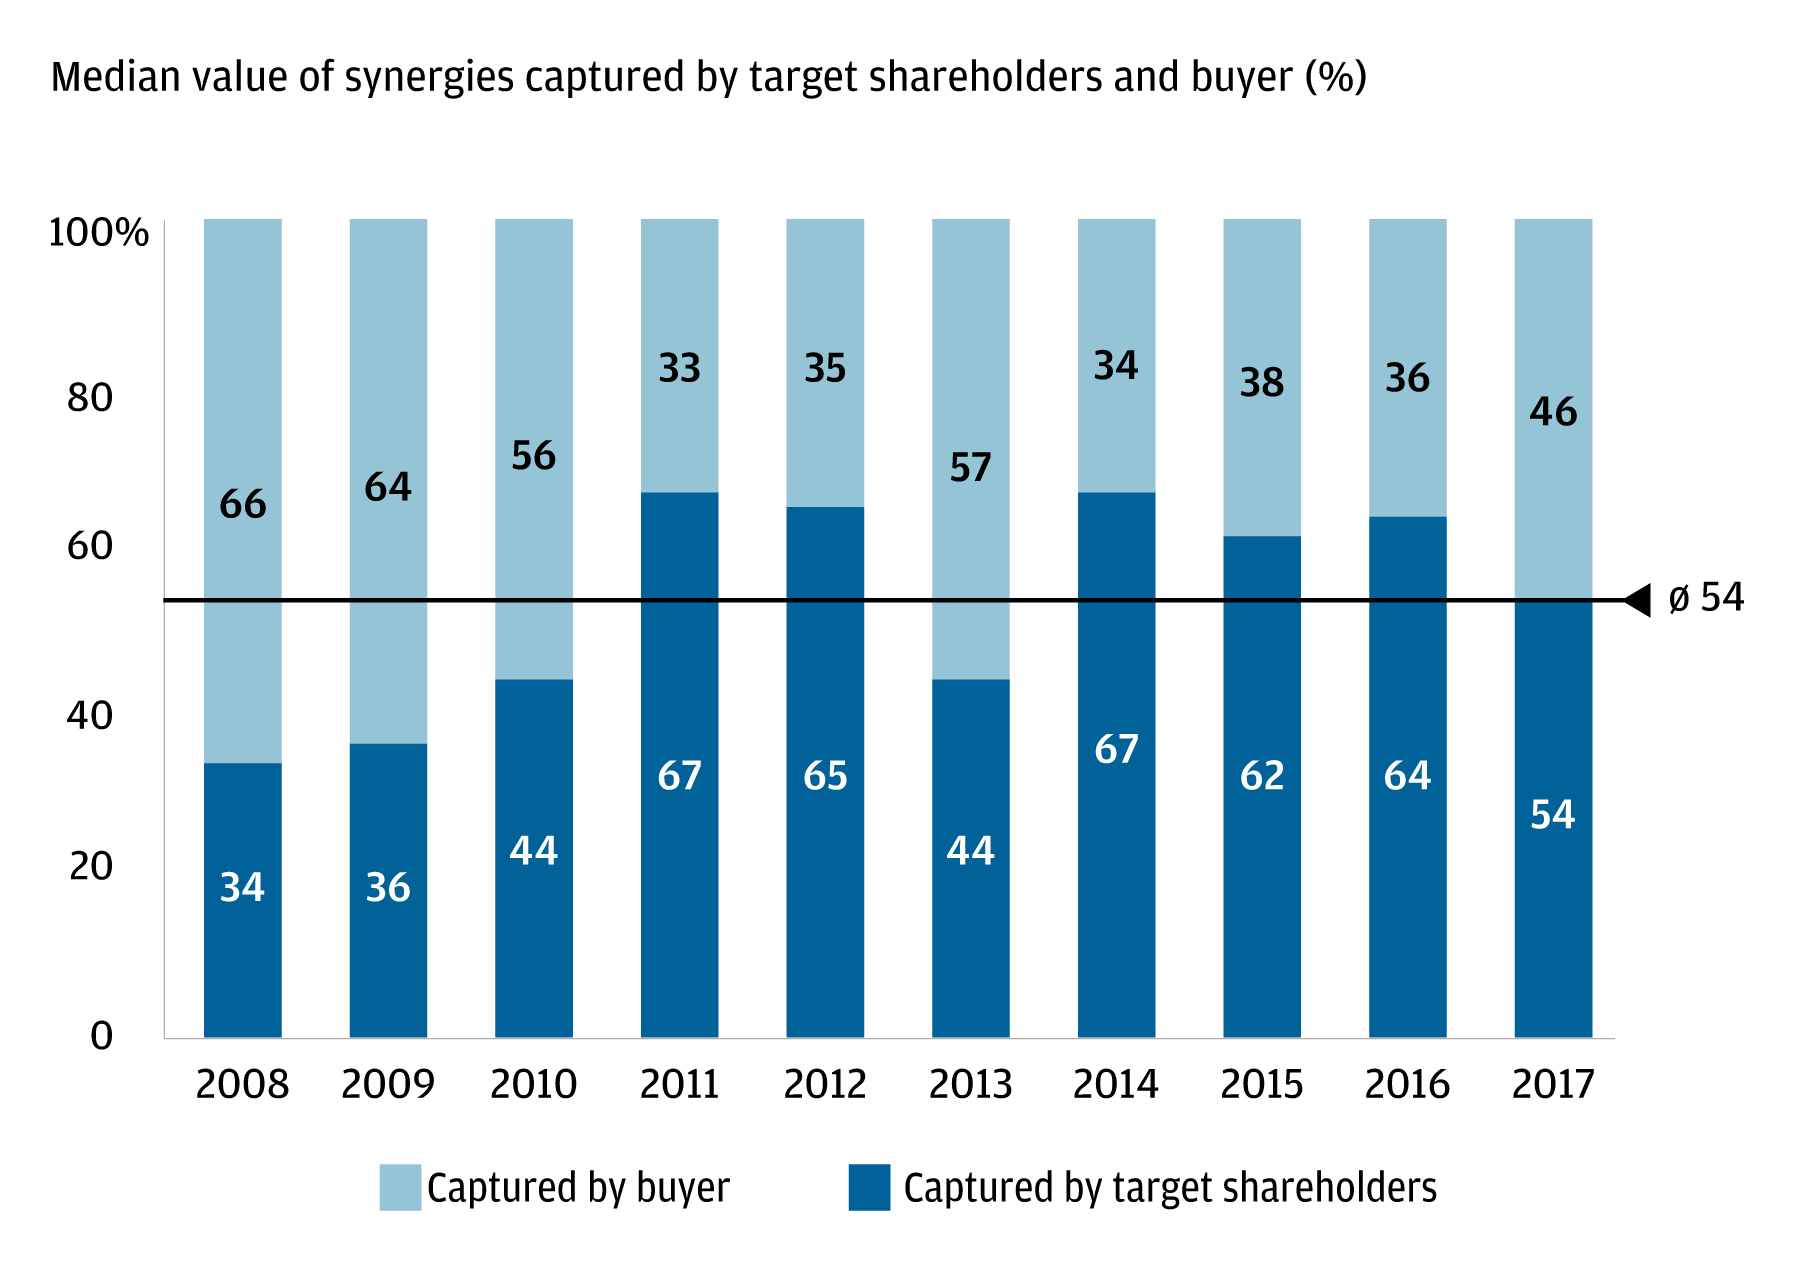 The chart shows the median value of synergies captured by target shareholders vs. the buyer as a percentage from 2008 through 2017. It shows that toward the end of this time frame, more of the value was being captured by the target shareholders.